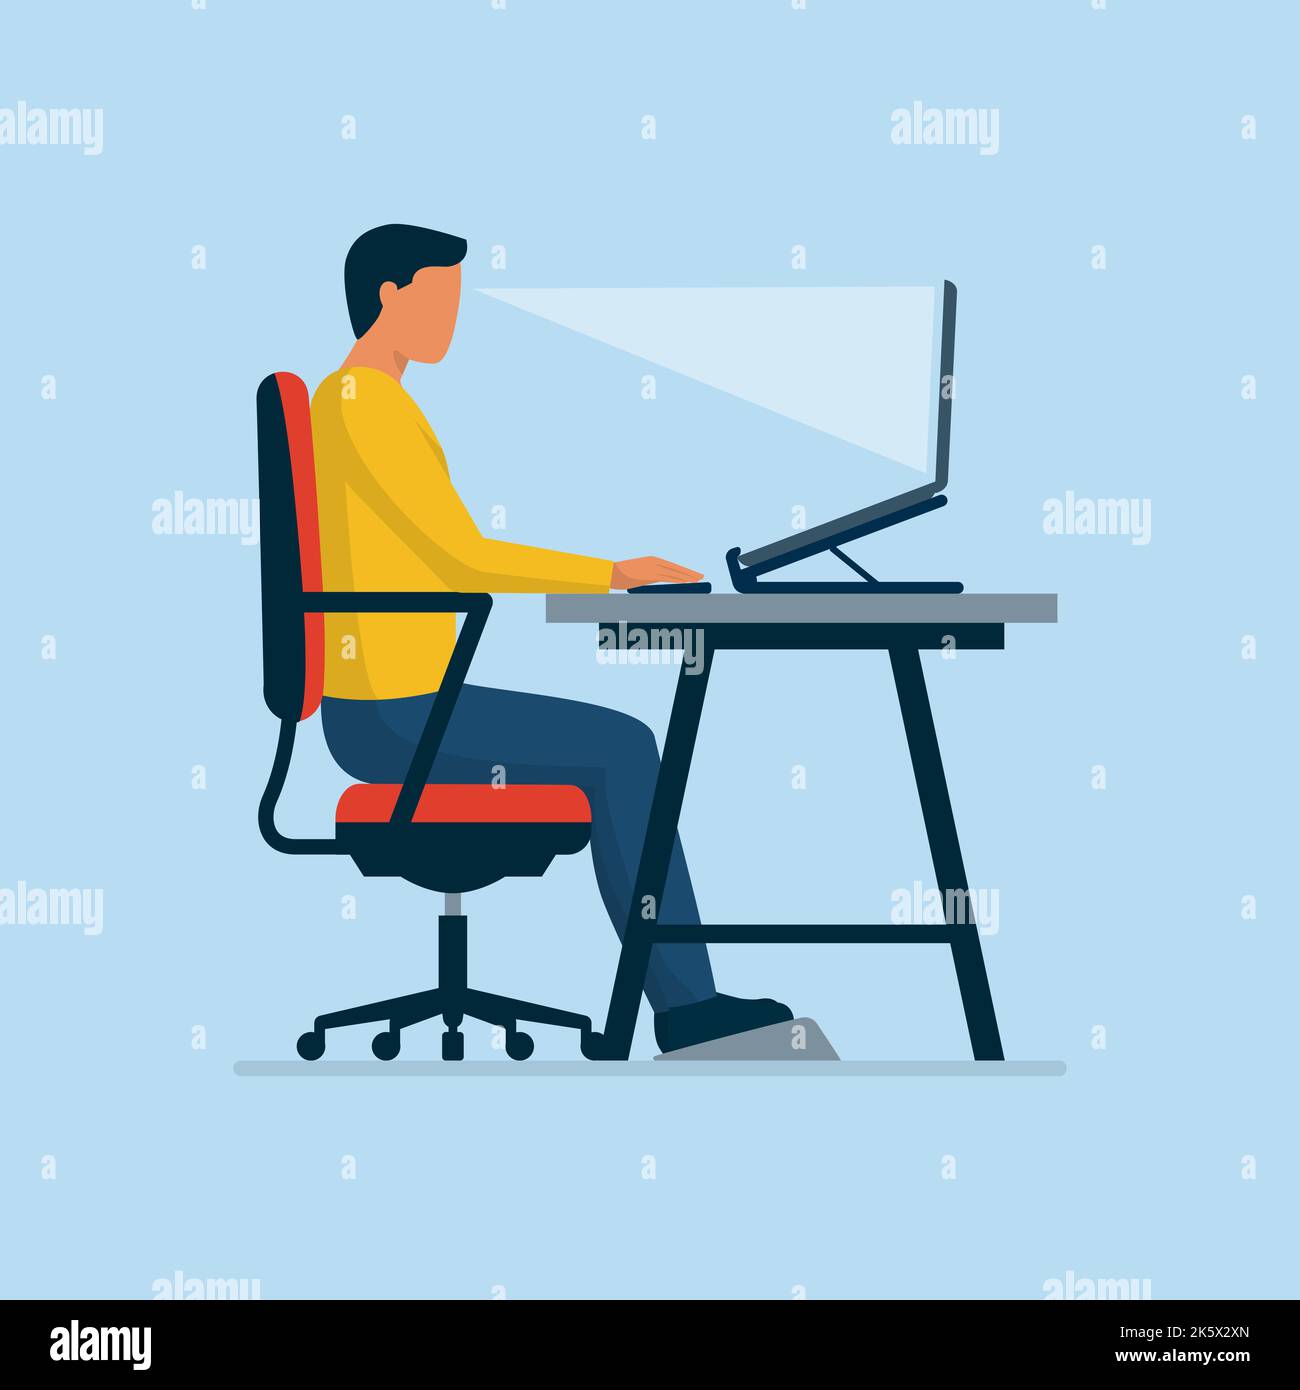 Ergonomic workspace and proper sitting posture at desk, man sitting properly at desk and working with a laptop Stock Vector